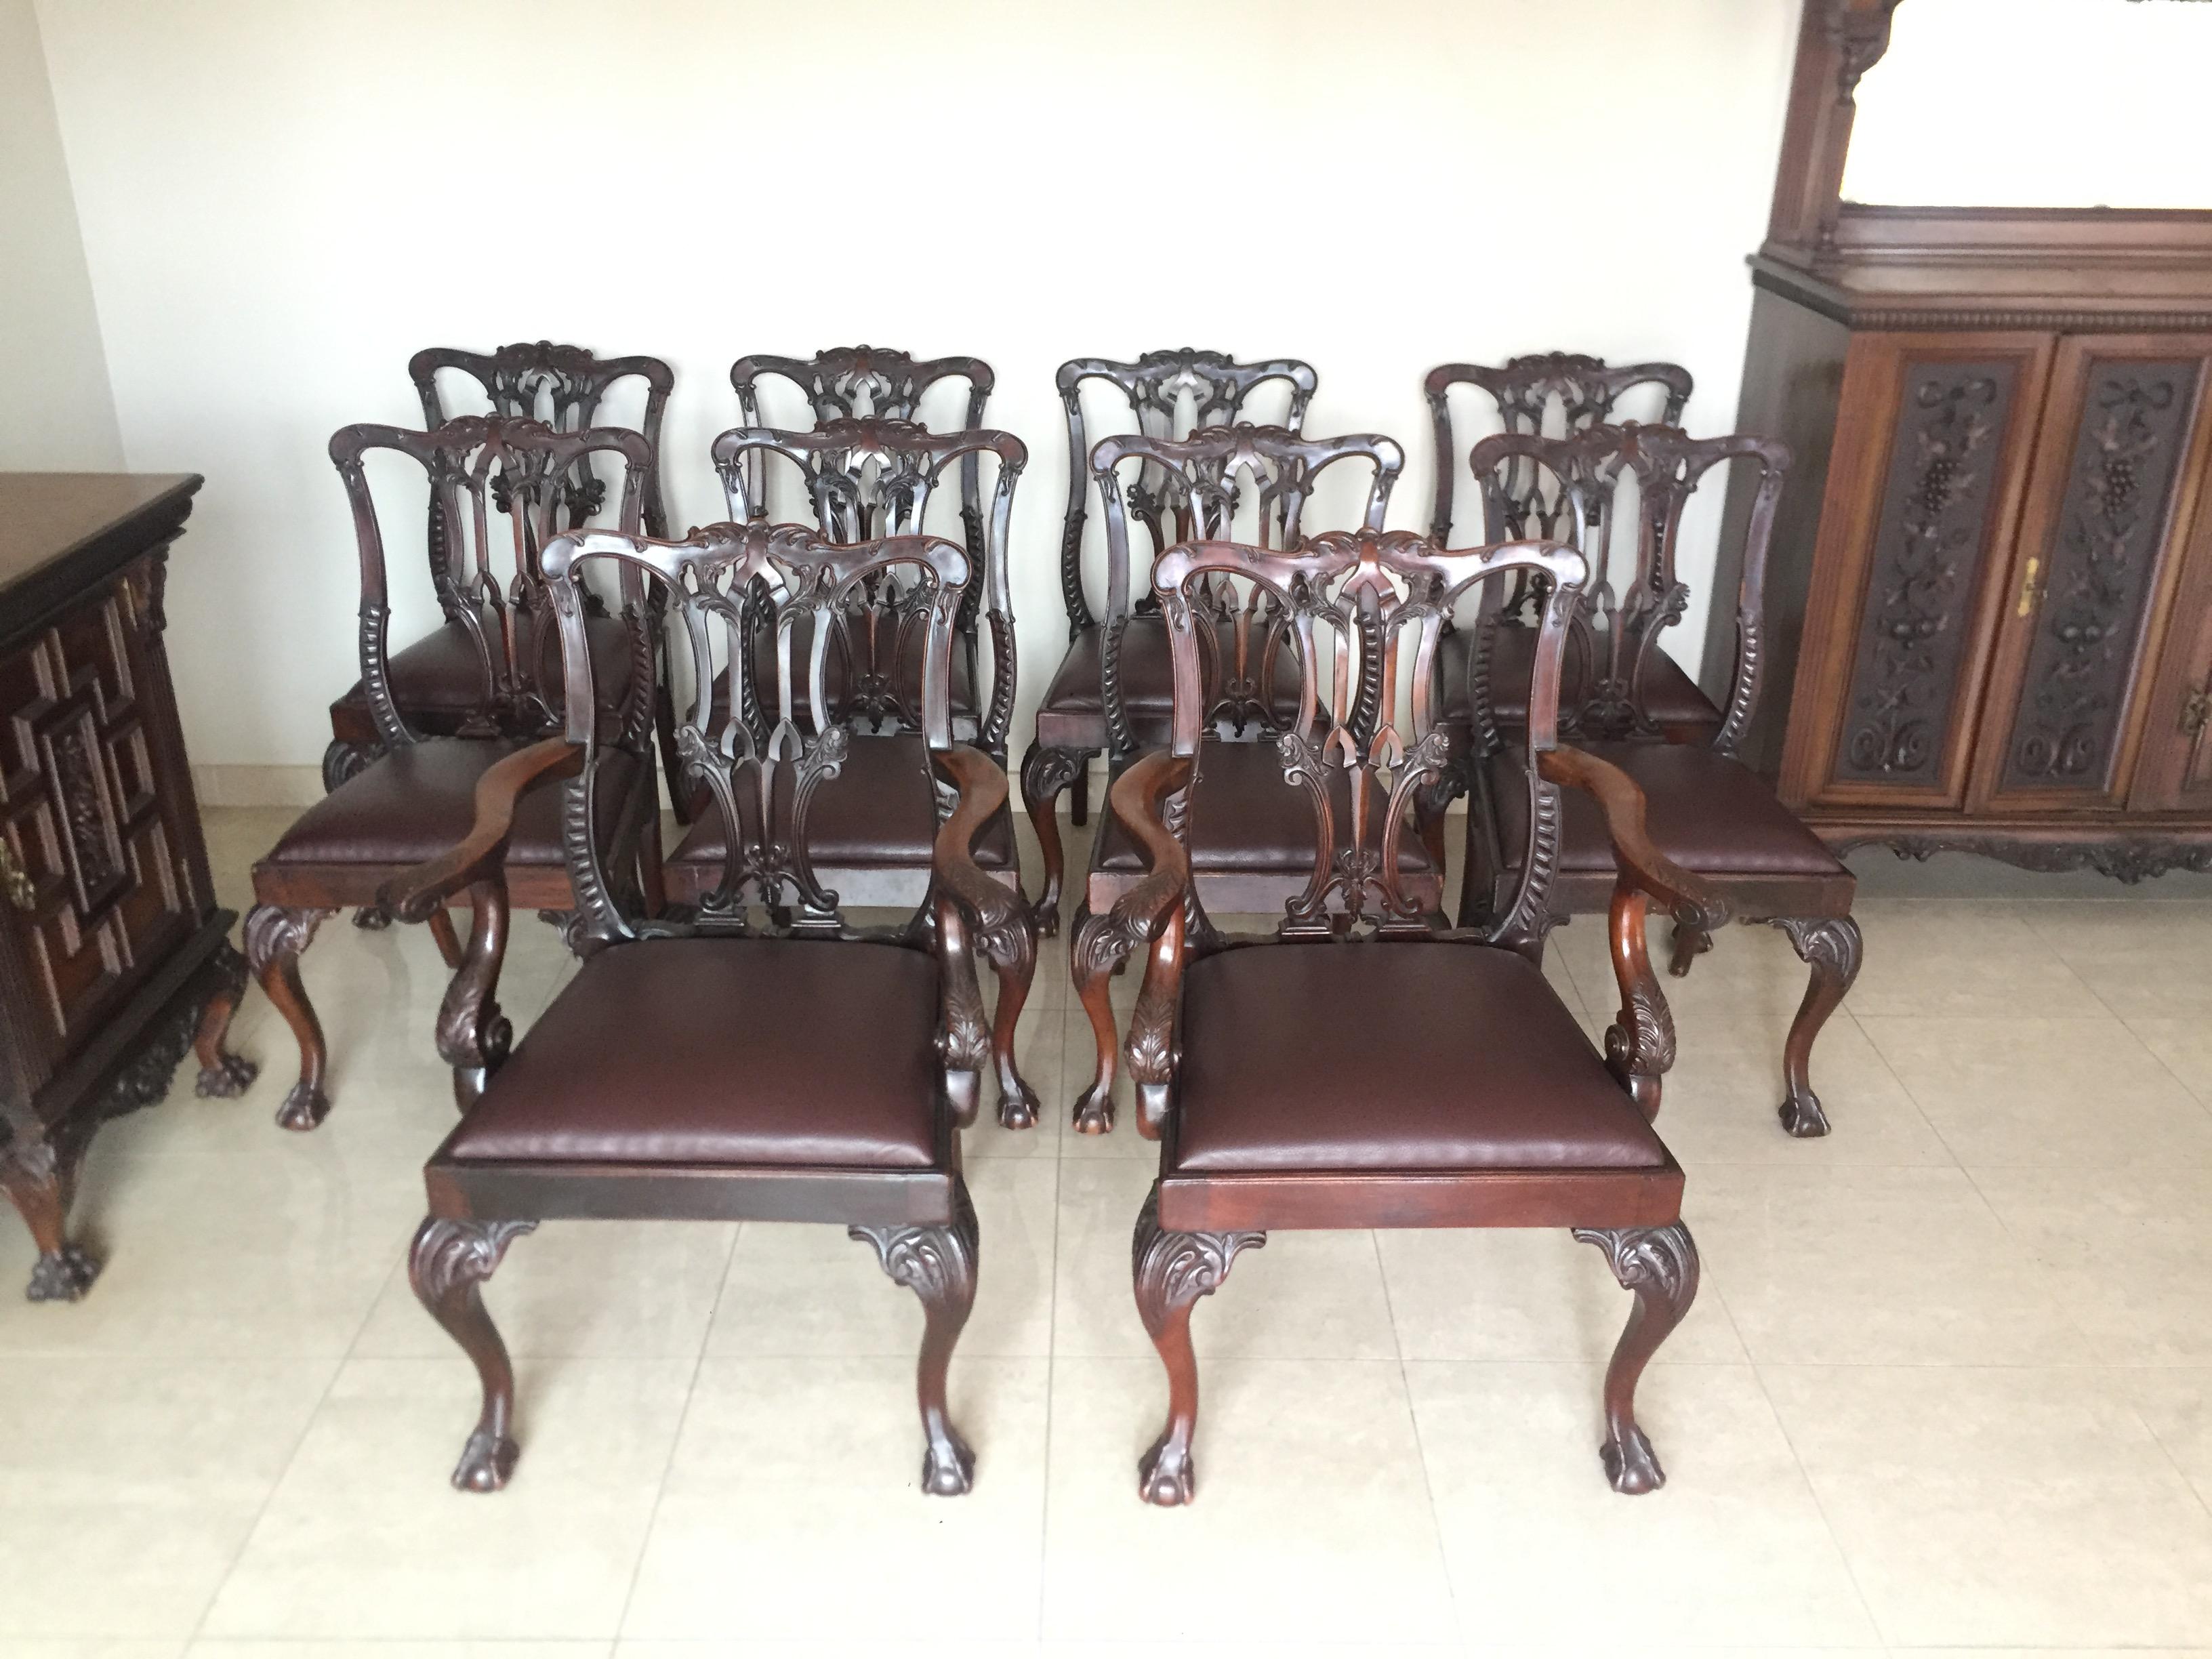 Impressive 19th English Chippendale ball and claw mahogany set of 10 dining chairs. The set is composed of 2 armchairs and 8 chairs. Upholstered in the 2000 with Synthetic Leather. Signed GTS, in each piece.
The set remains in excellent condition.